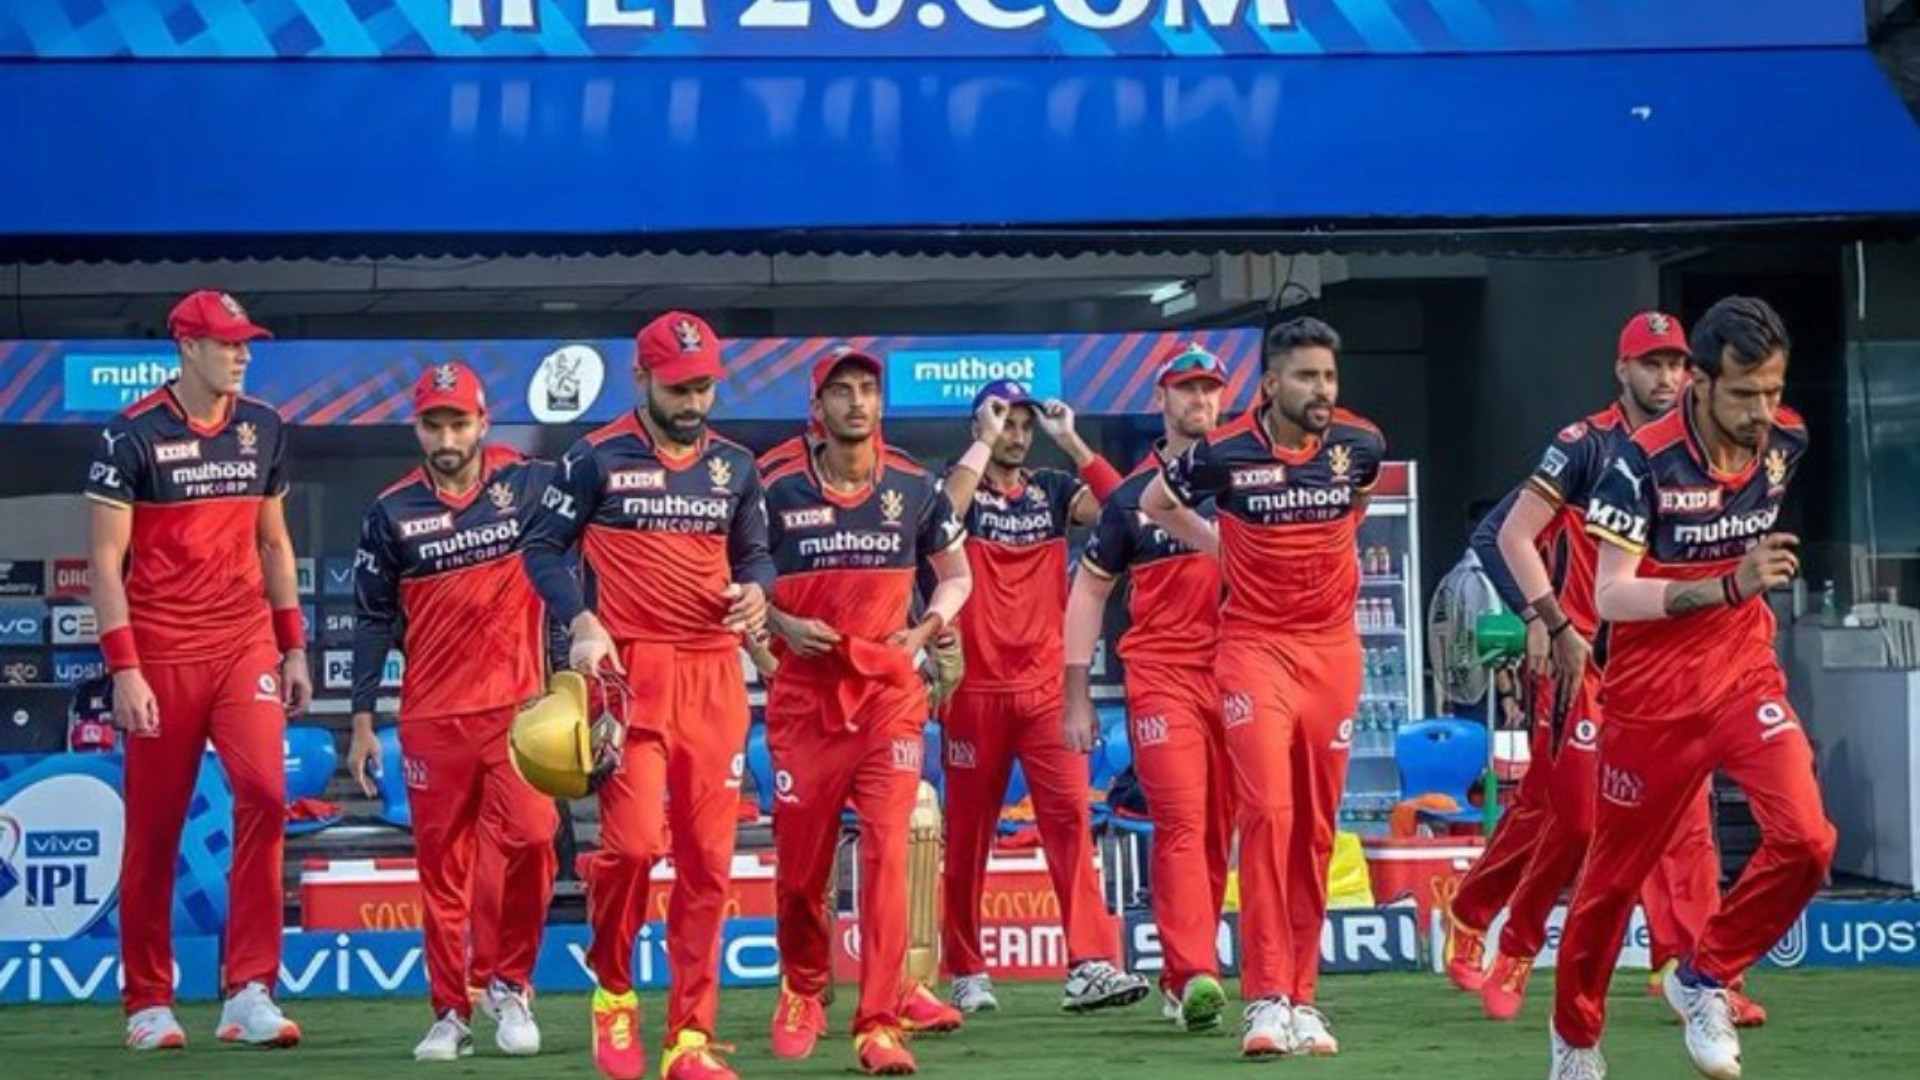 Royal Challengers Bangalore are unbeaten in IPL 2021. (Image Credit: Twitter)